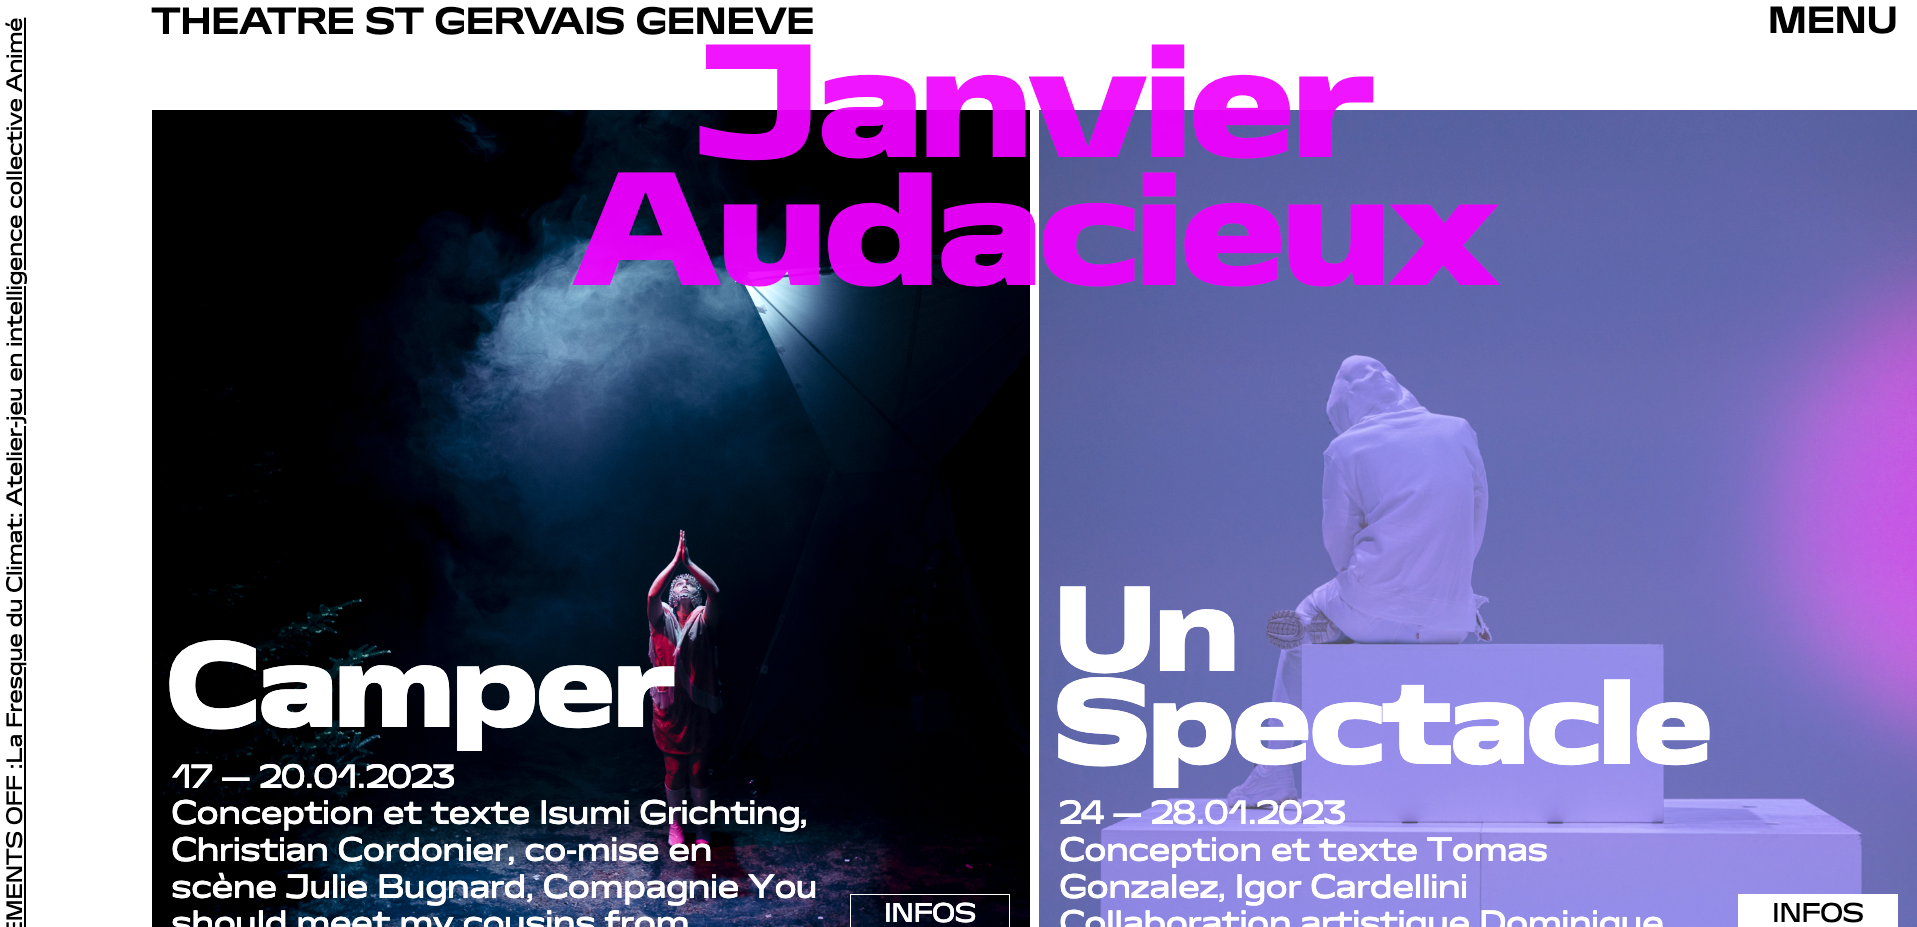 Homescreen of Theatre Gervais in Geneve